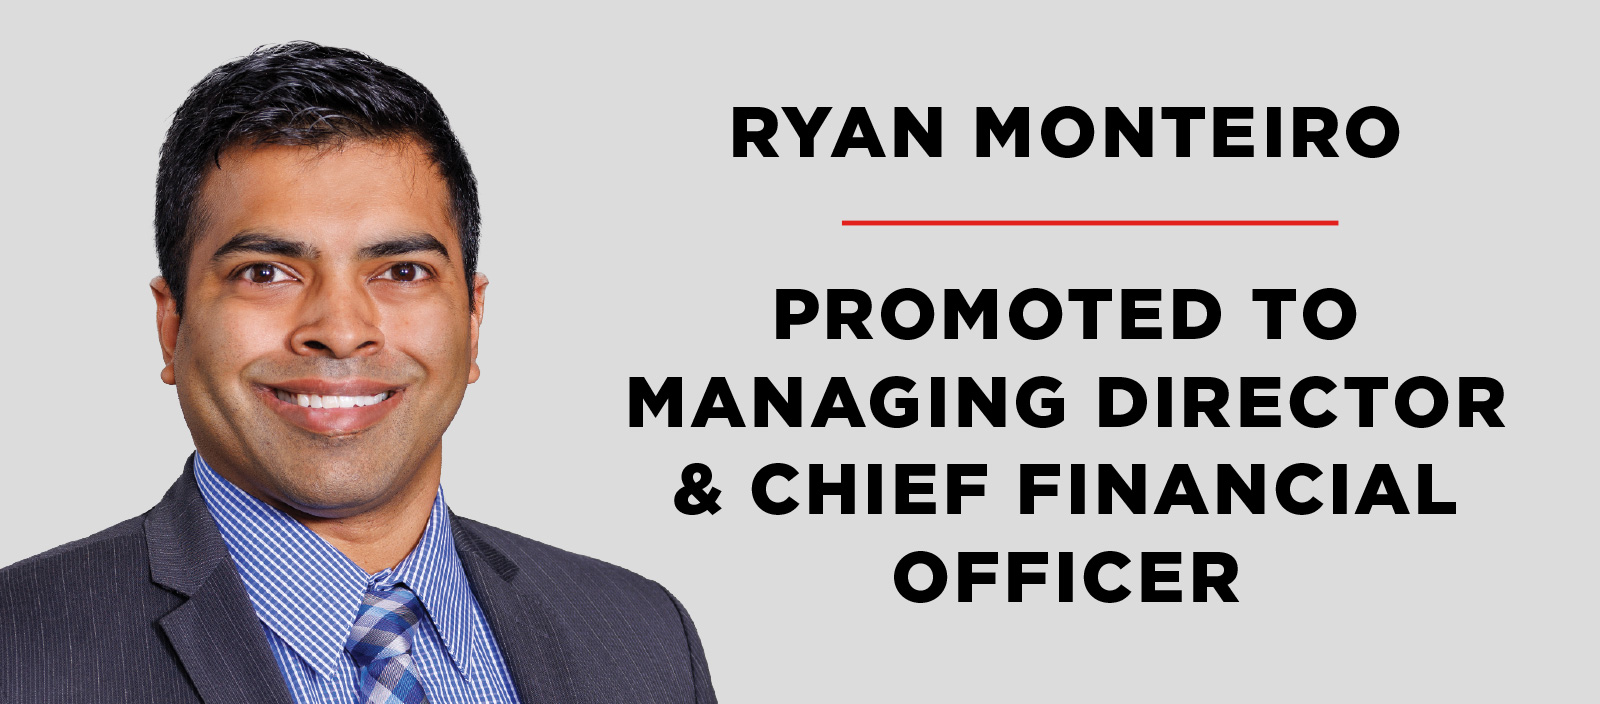 Civitas Capital Group Promotes Ryan Monteiro to Chief Financial Officer and Managing Director